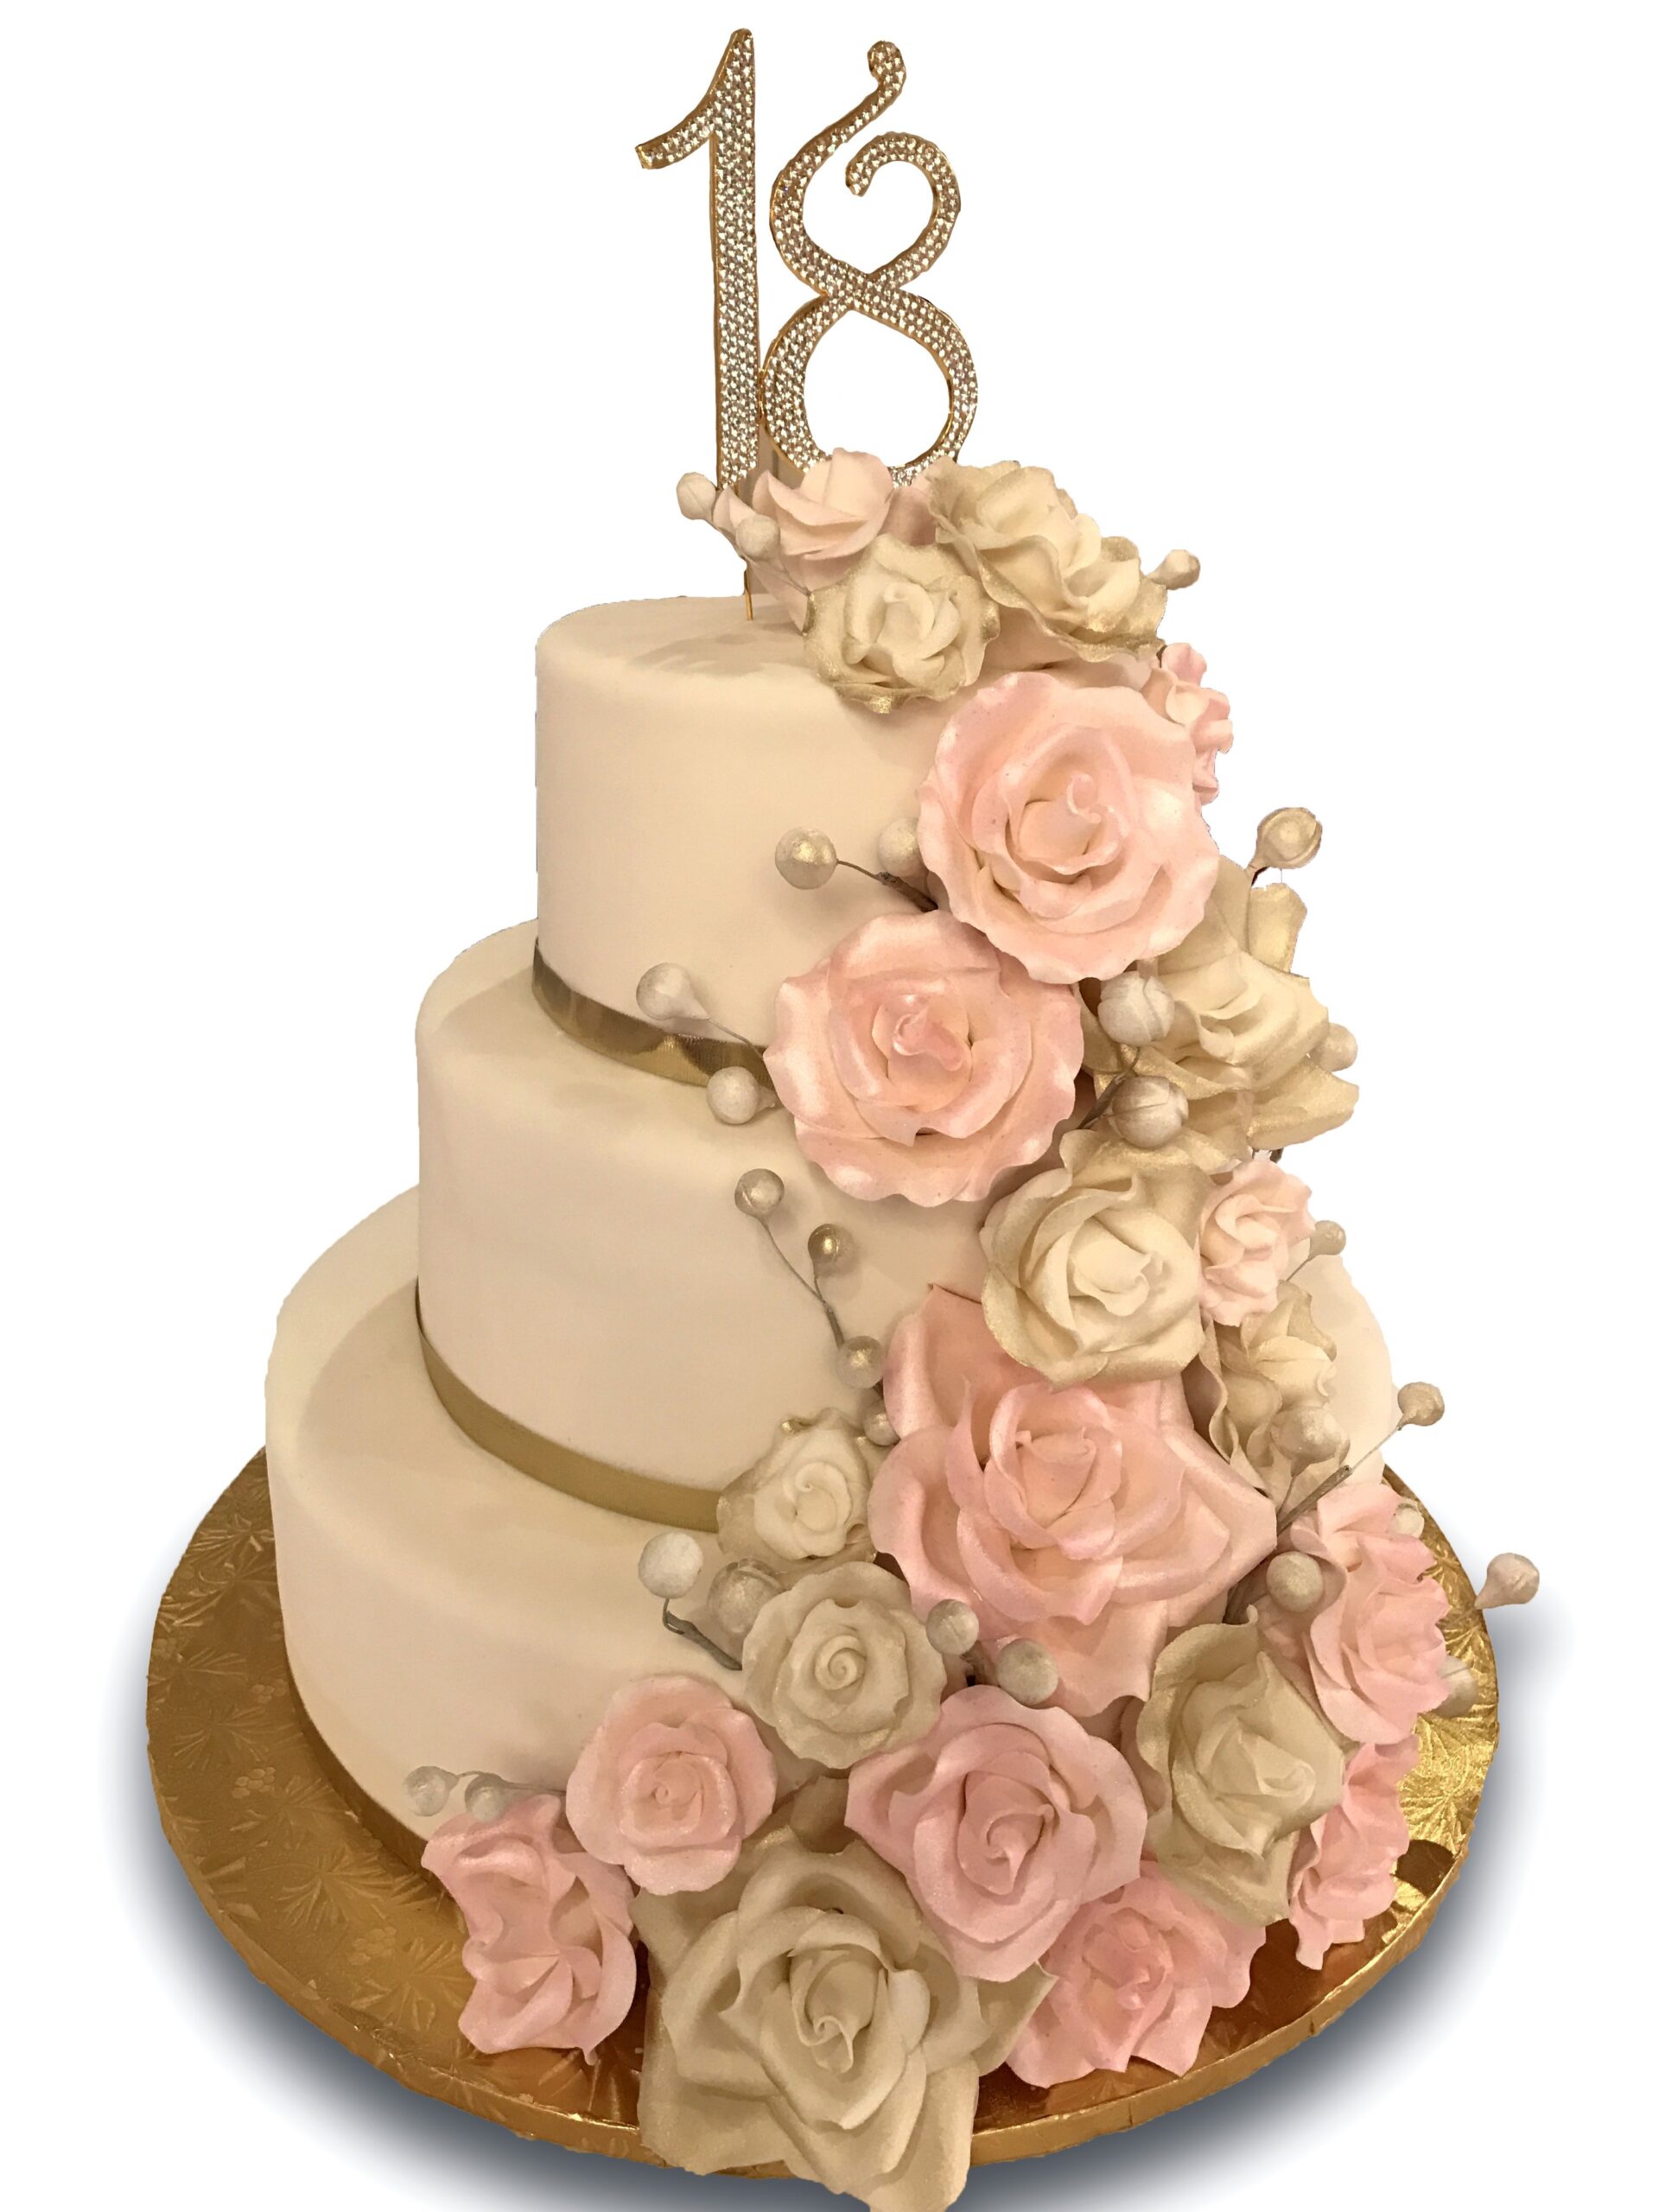 AB020. Three tier fondant covered cake with large gumpaste roses